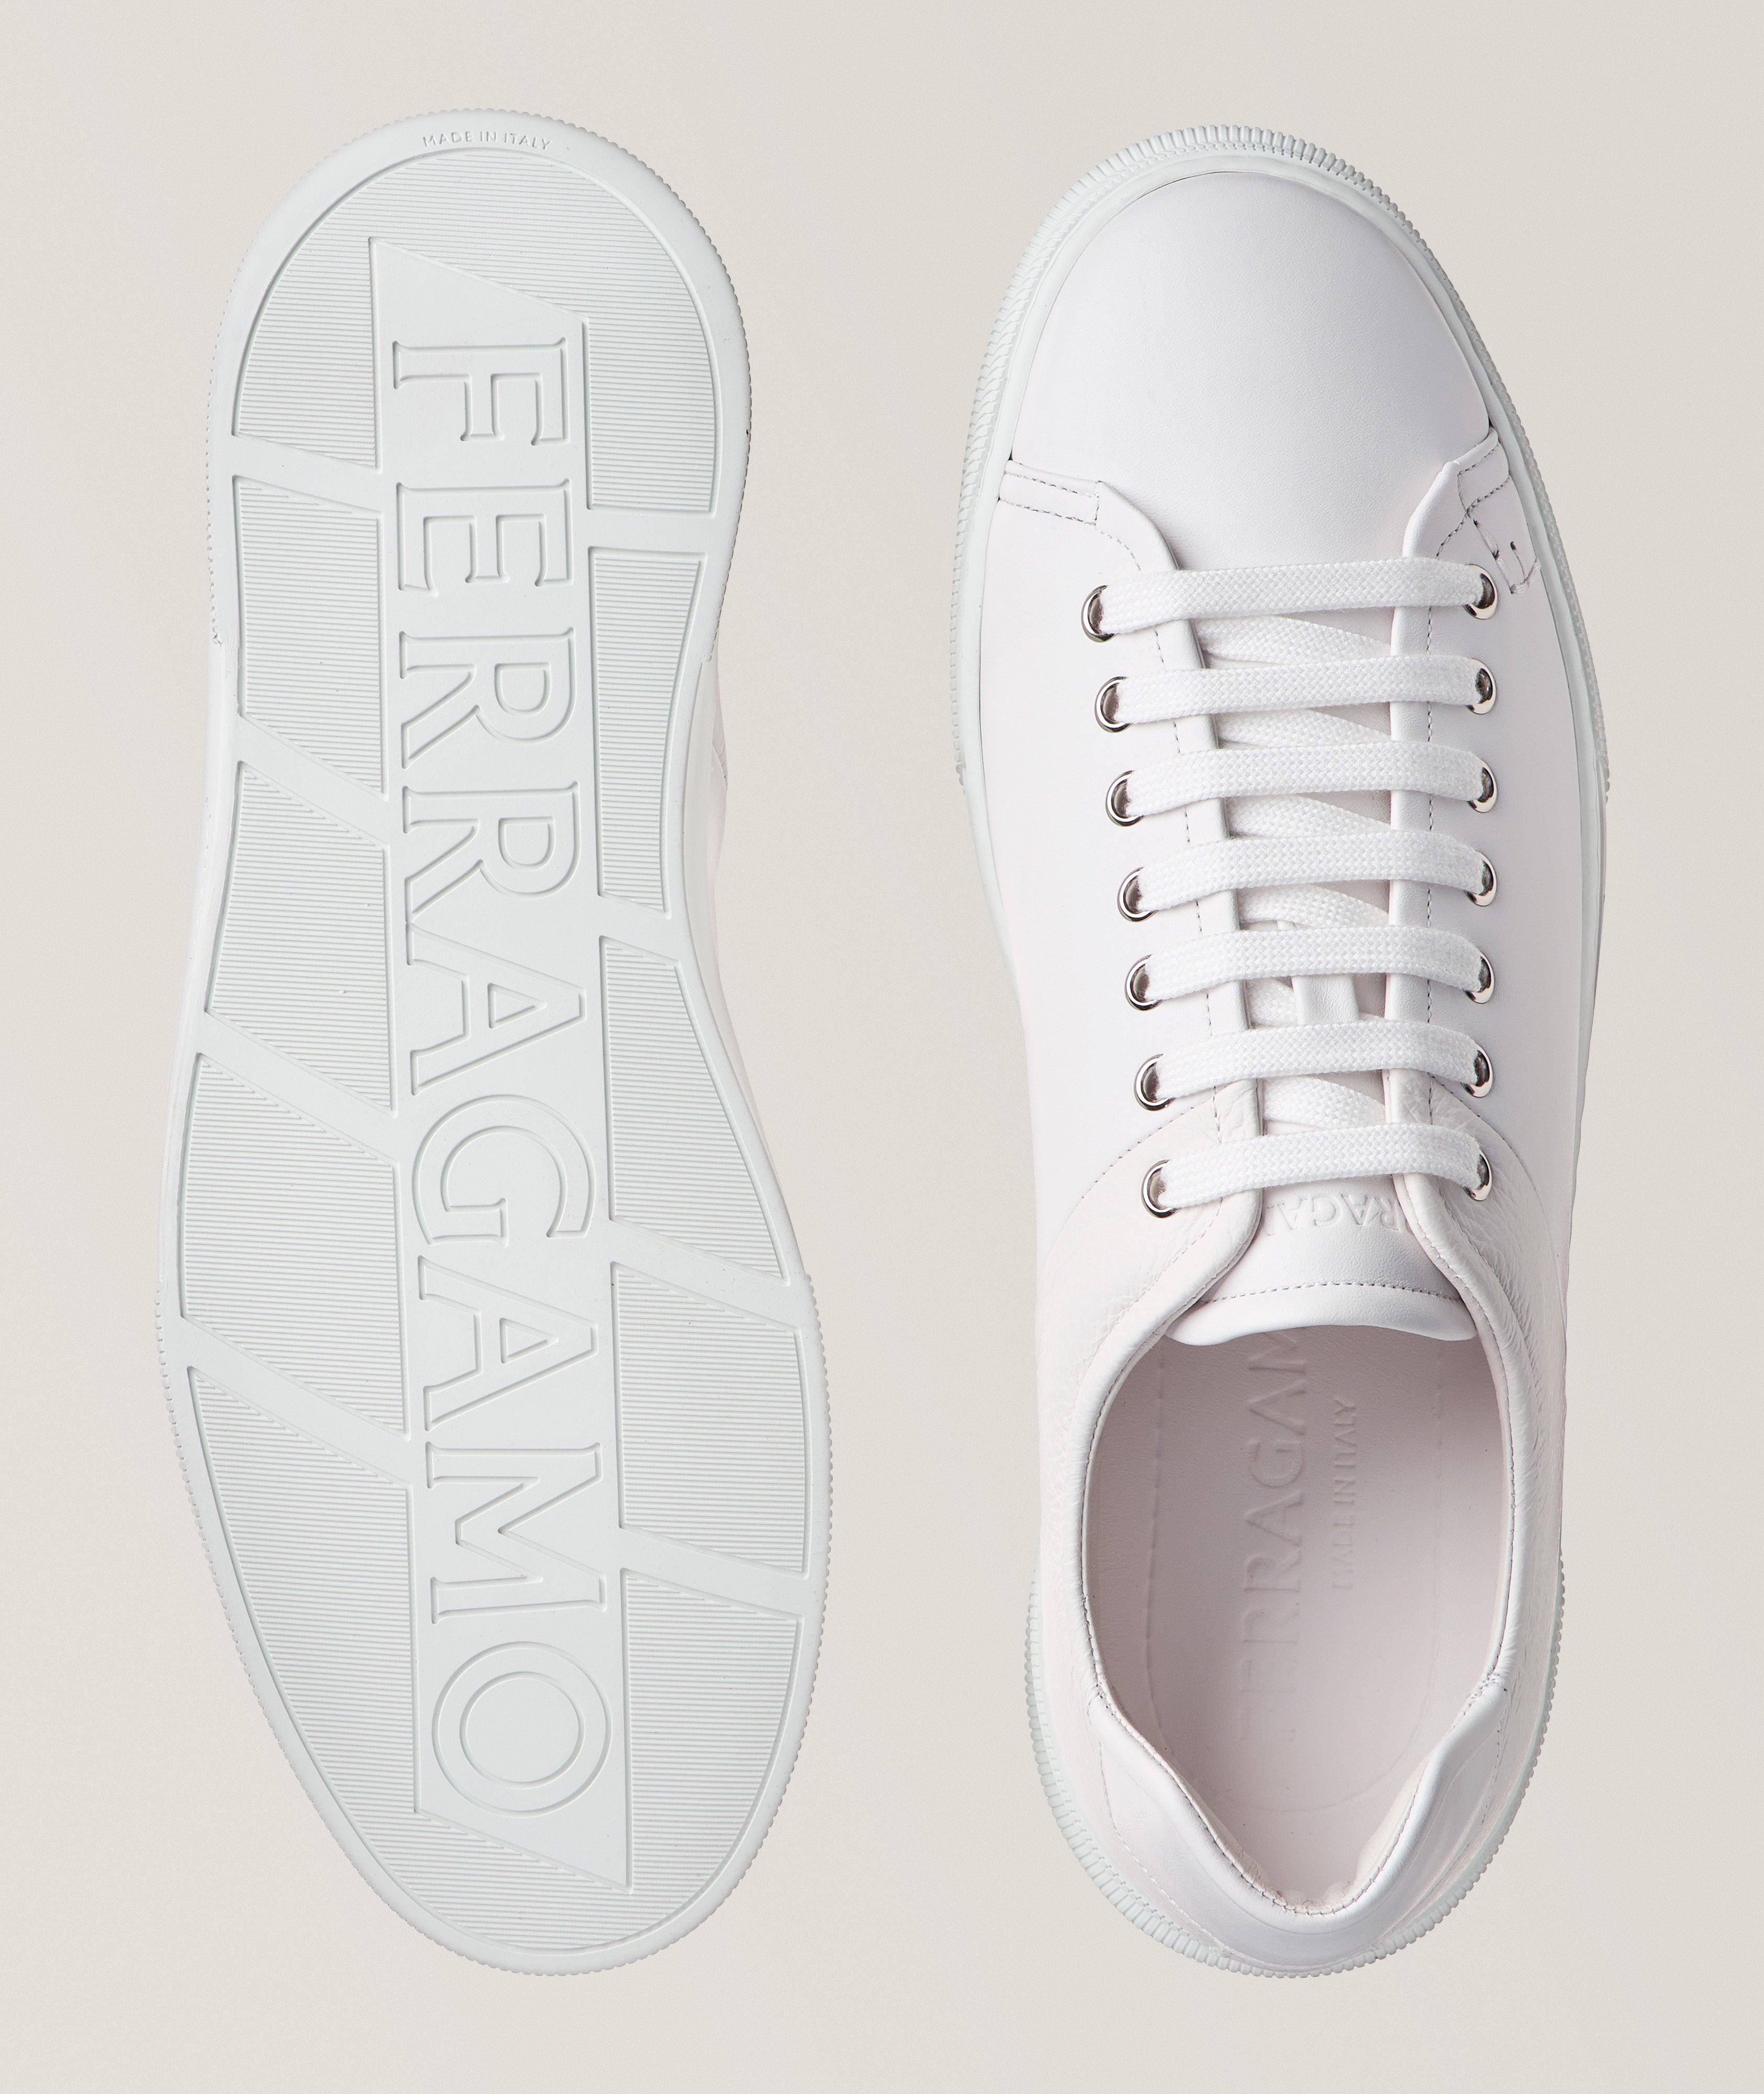 Clayton Leather Sneakers